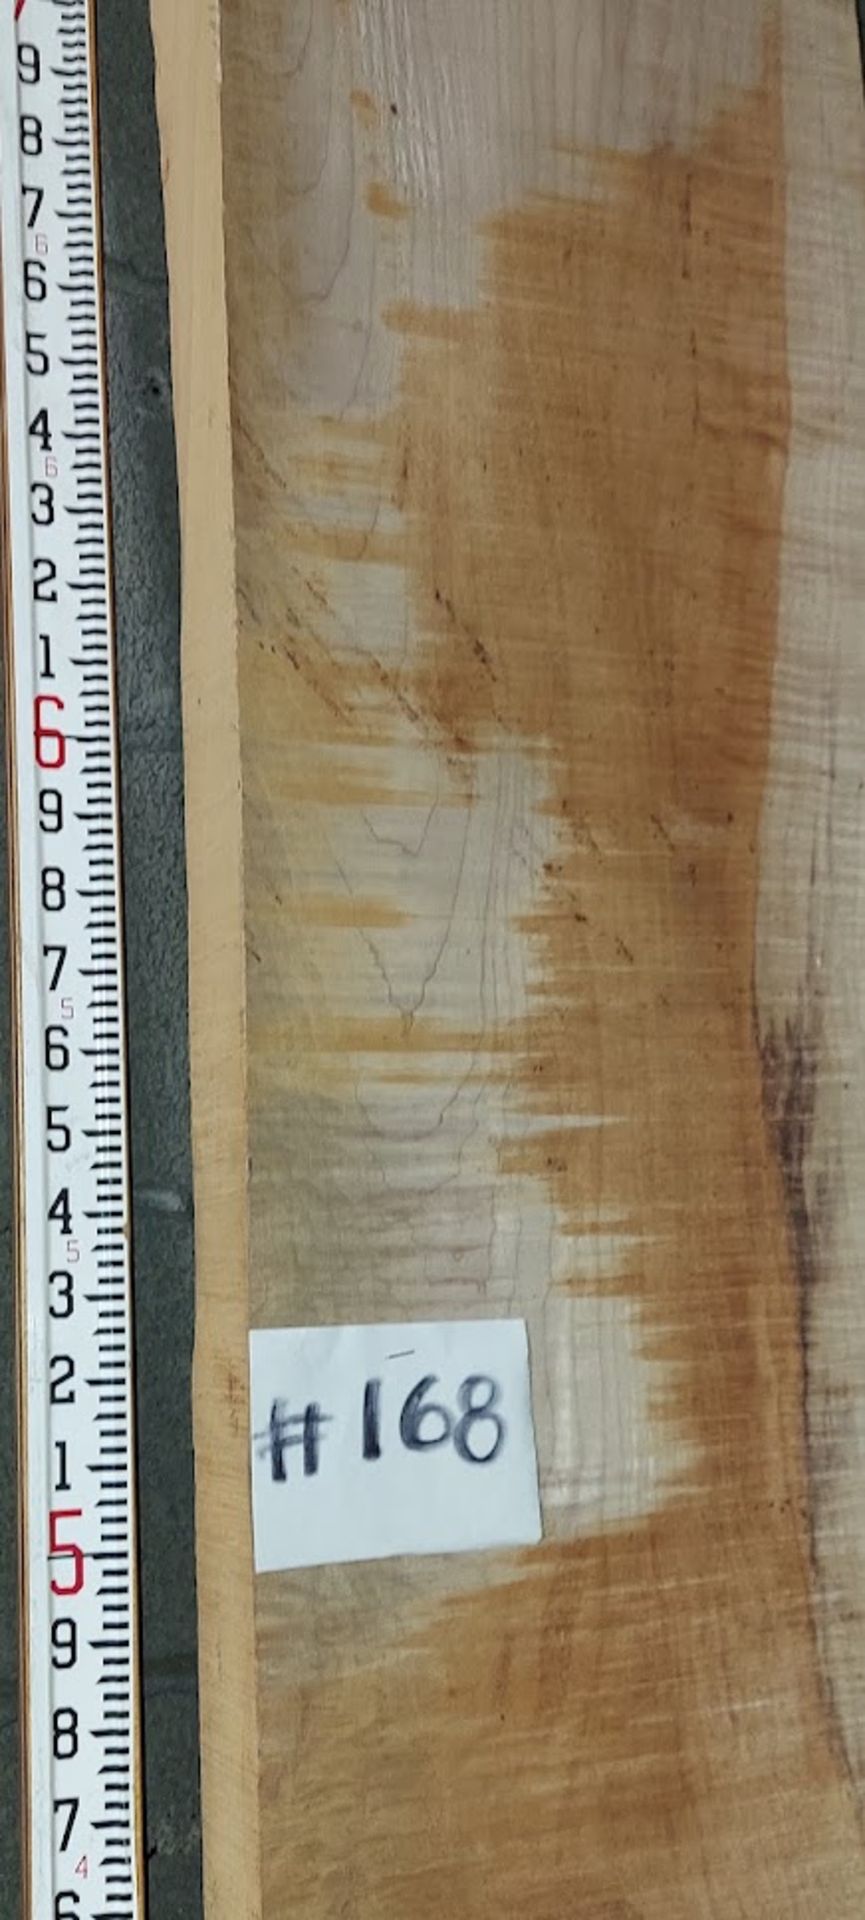 Maple Hardwood Lumber Slab, Size is approx. 101" x 12" x 2-3/4" Thick, Curly (Book Matched 169) - Image 2 of 2